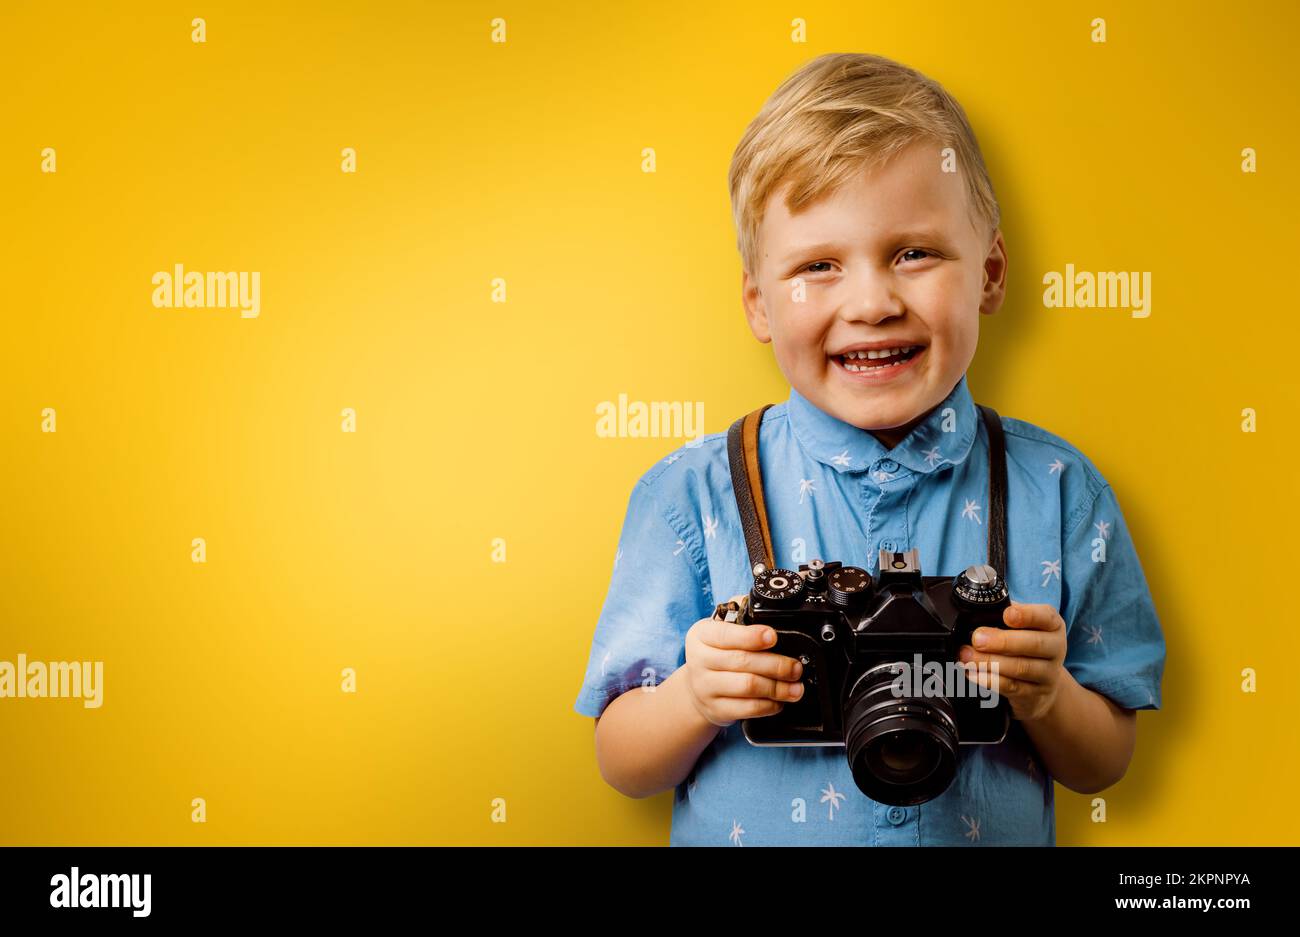 little smiling boy with retro camera on a yellow background with copy space. child photographer Stock Photo